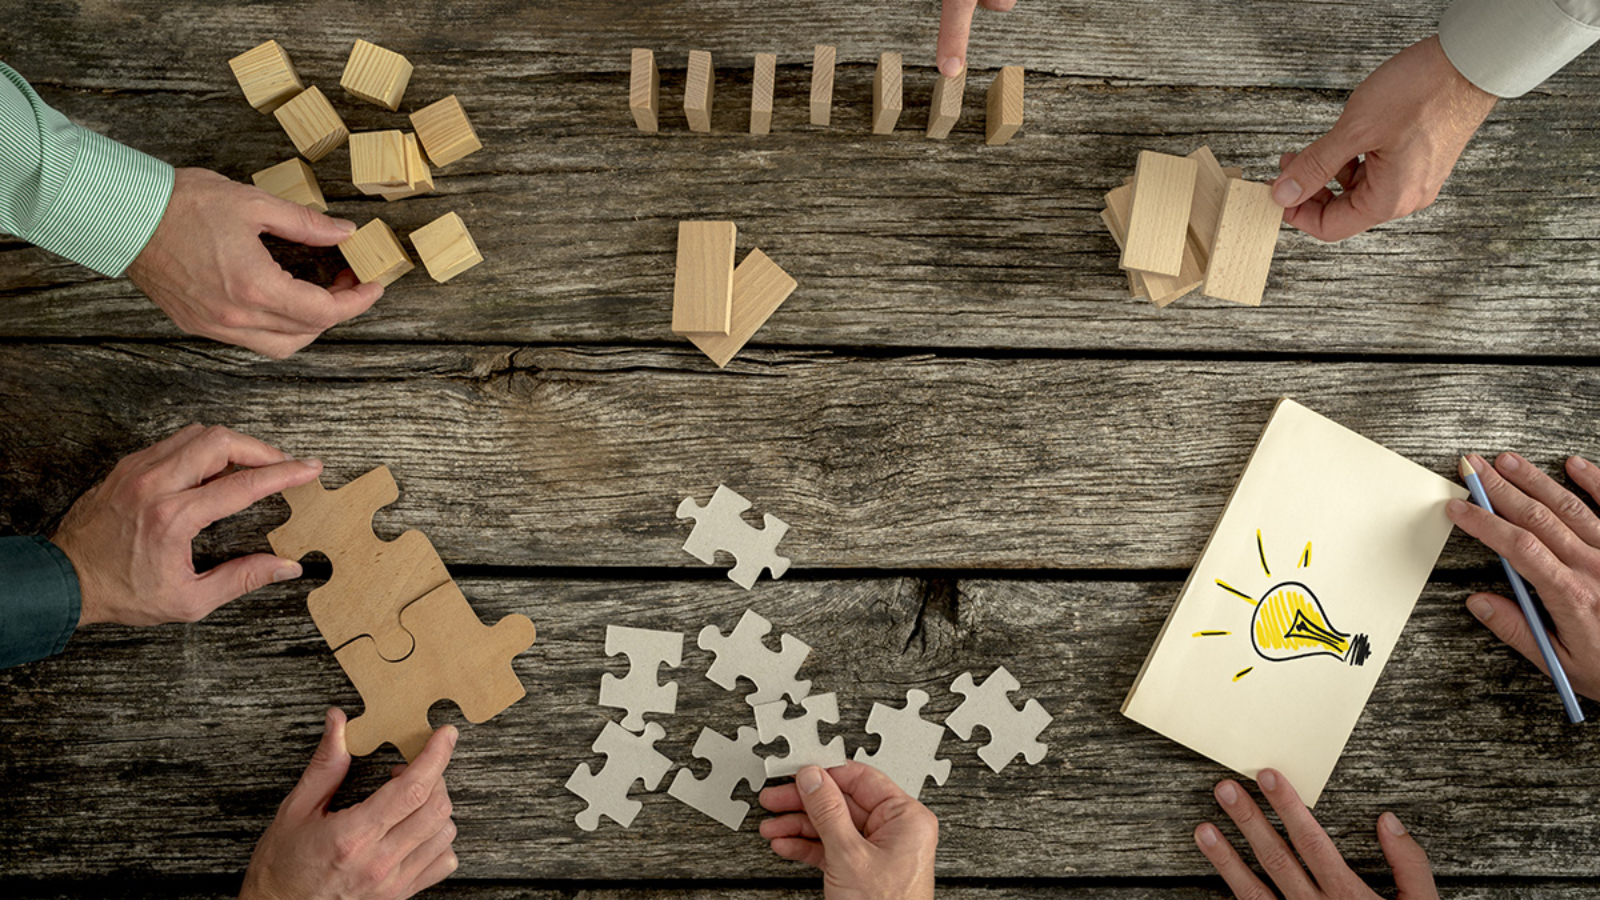 Businessmen planning business strategy while holding puzzle pieces, creating ideas with light bulb drawn on paper and rearranging wooden blocks. Conceptual of teamwork, strategy, vision or education.